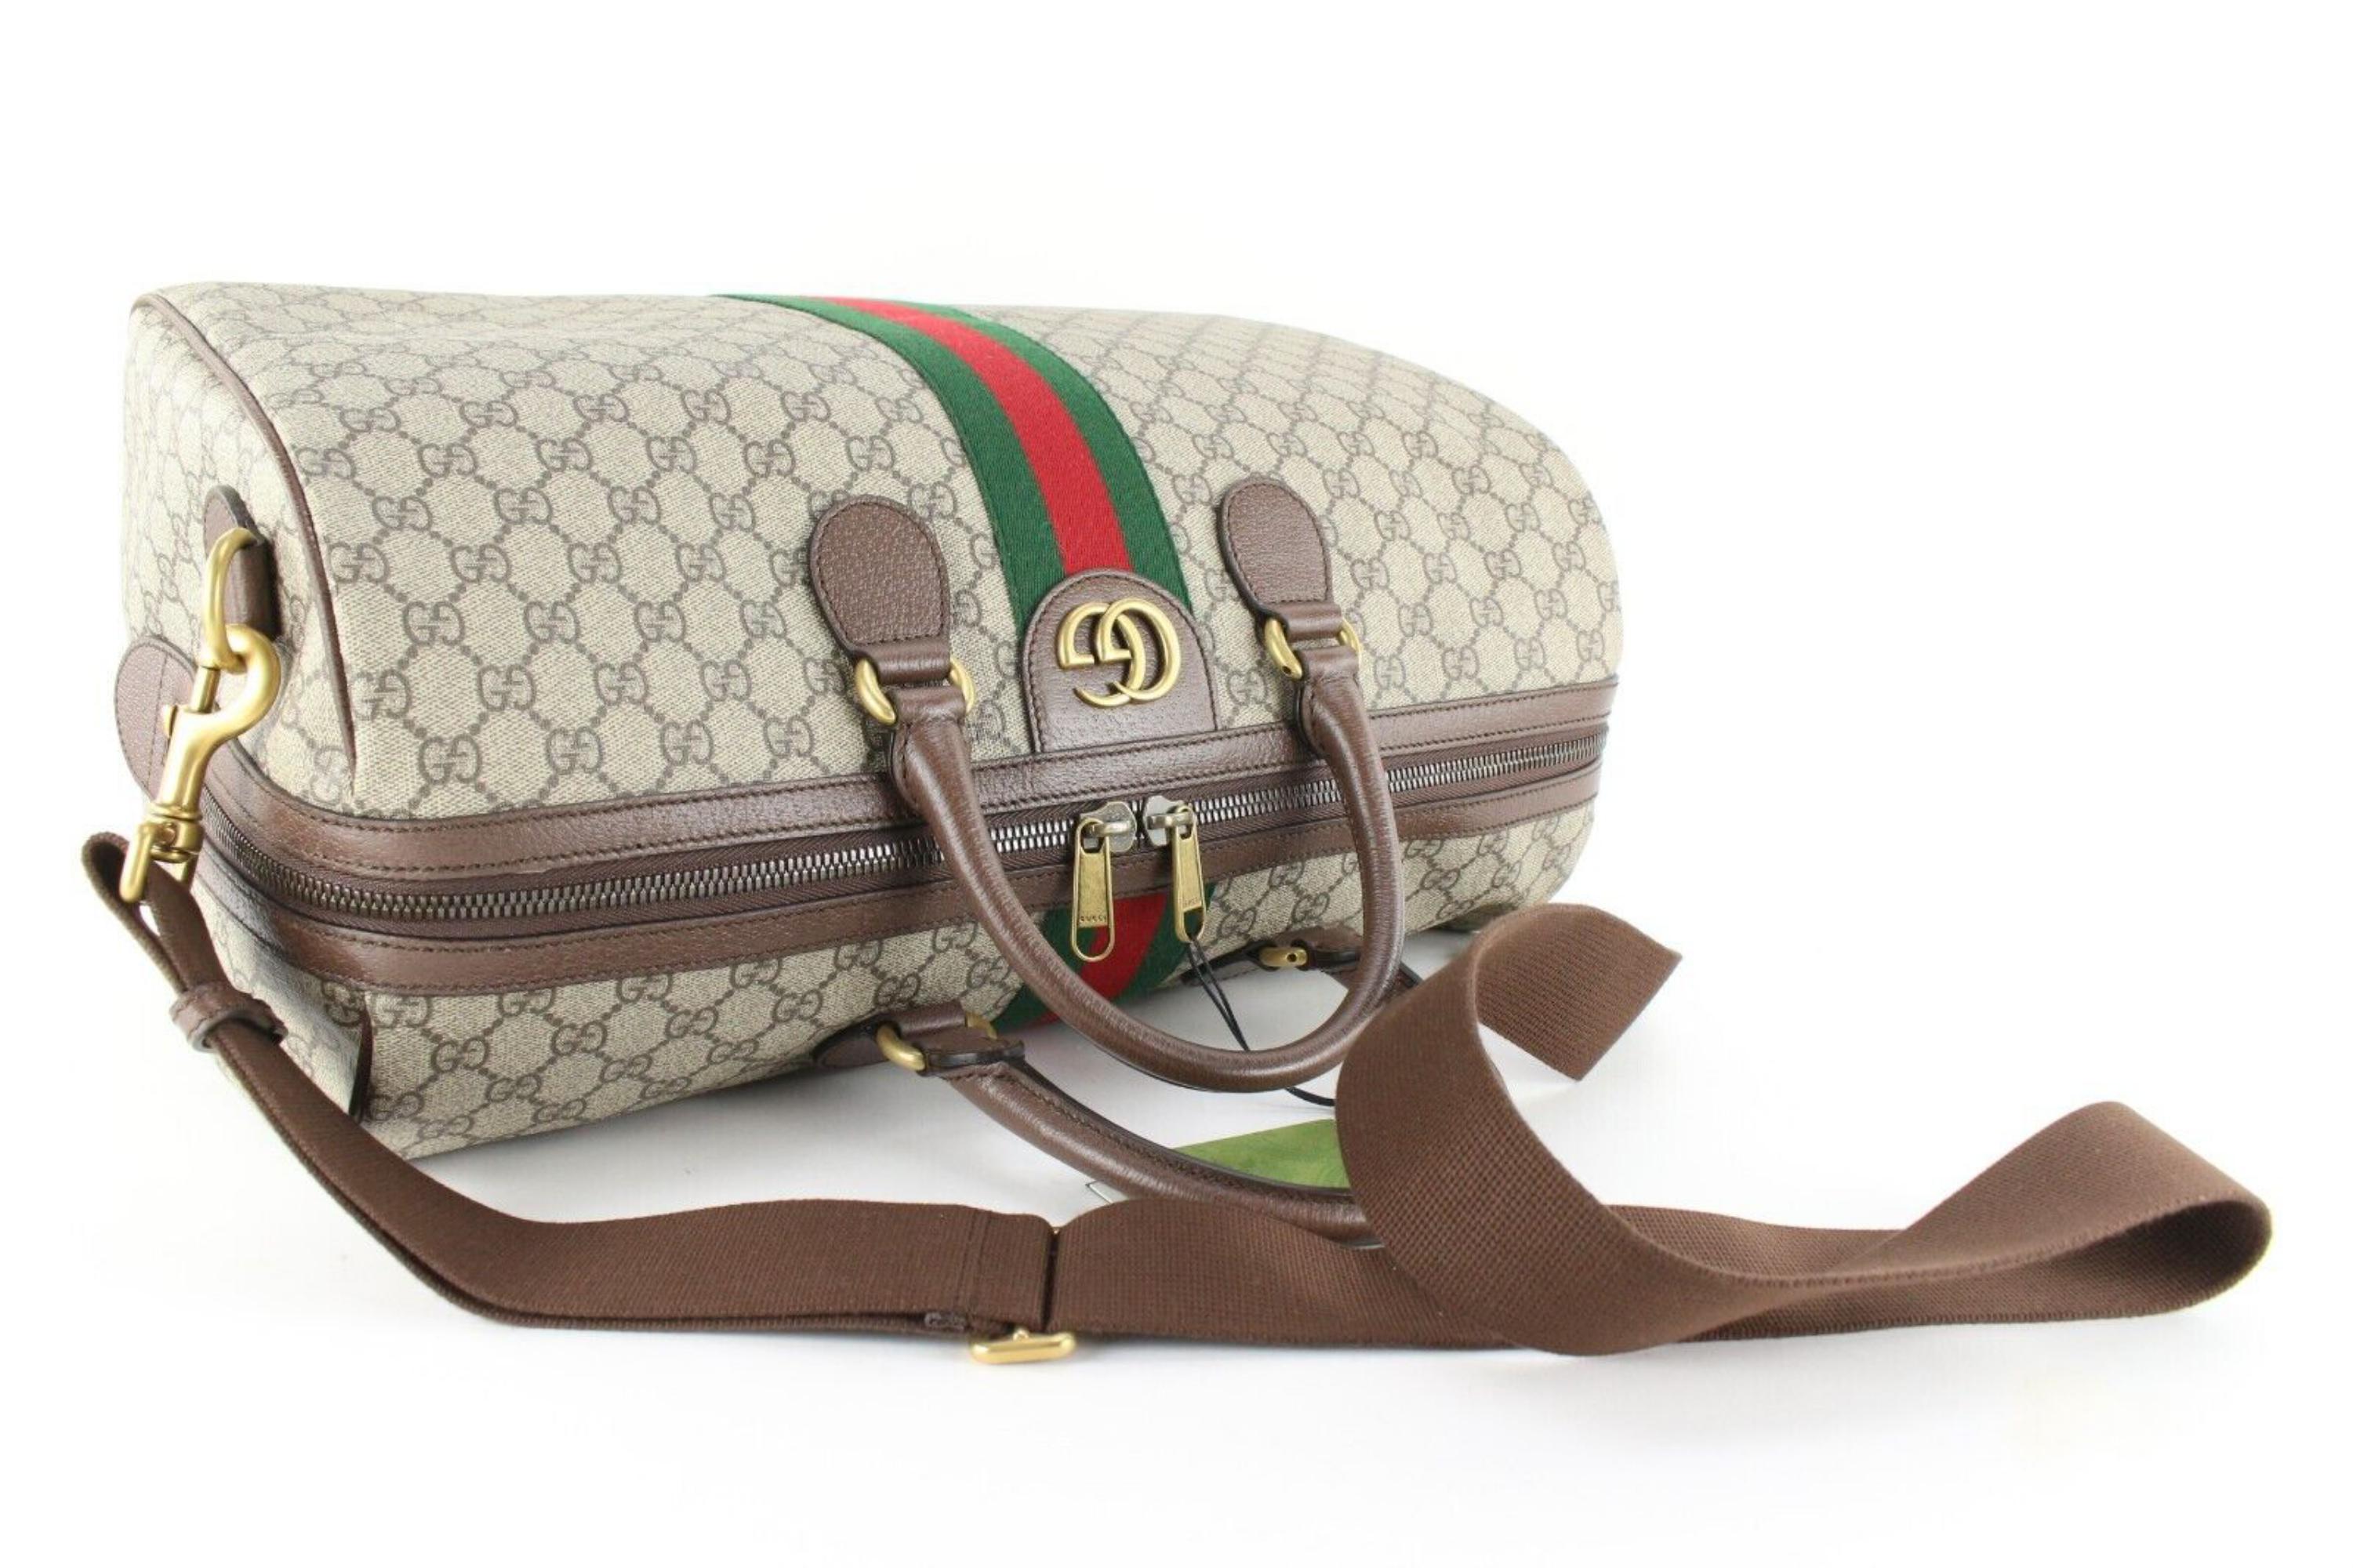 Gucci Monogram GG Supreme Savoy Duffle Bag with Strap 1GG1221 In New Condition For Sale In Dix hills, NY